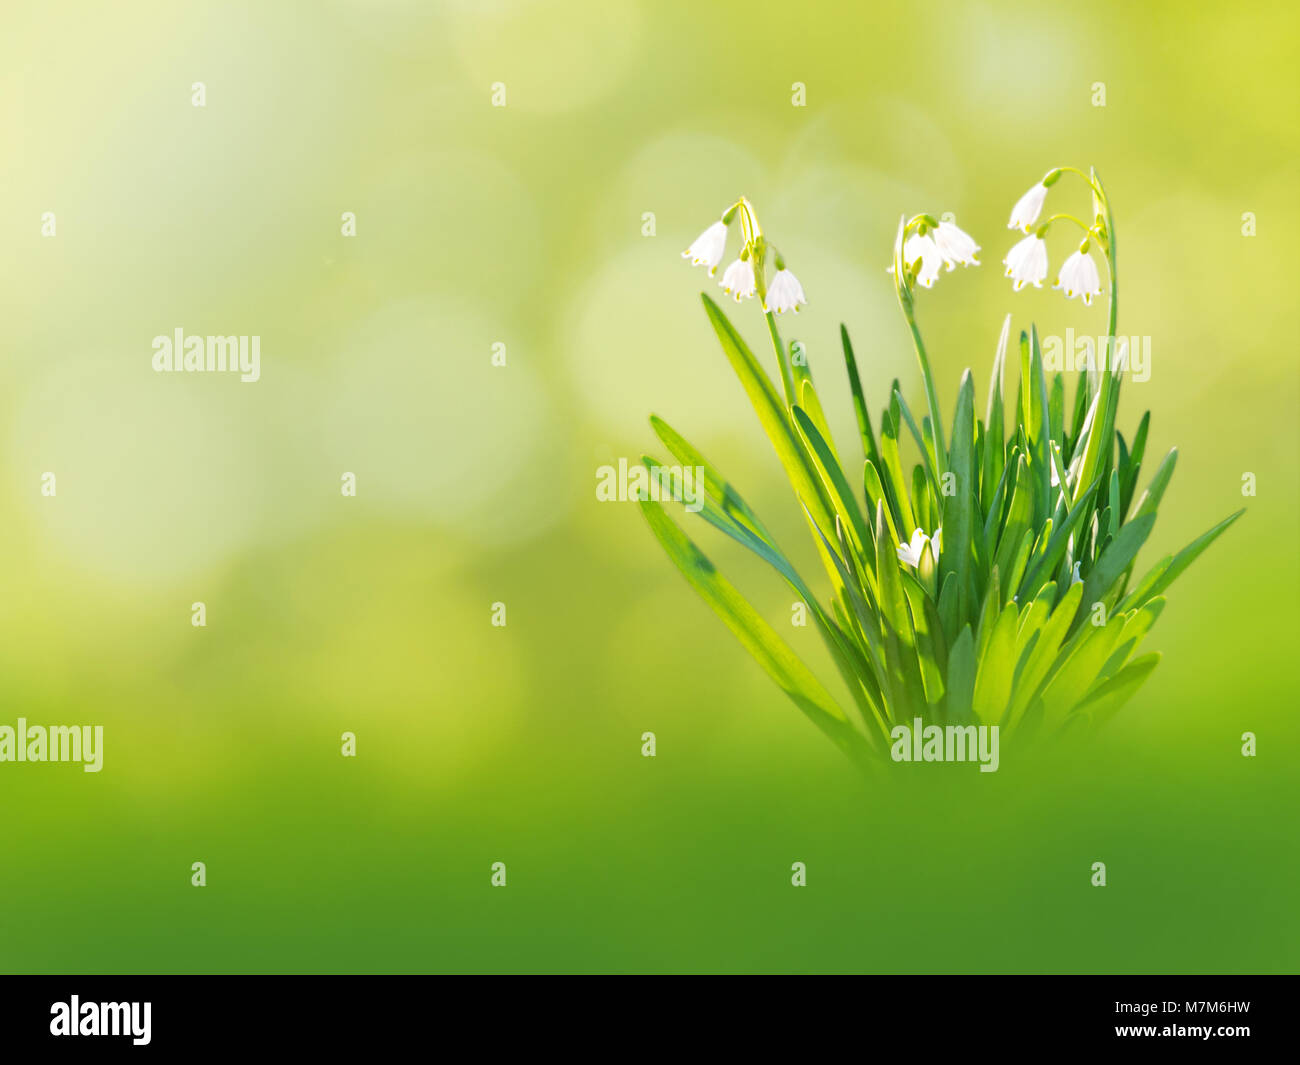 White snowdrop or galanthus flowers on the spring blurred garden background Stock Photo